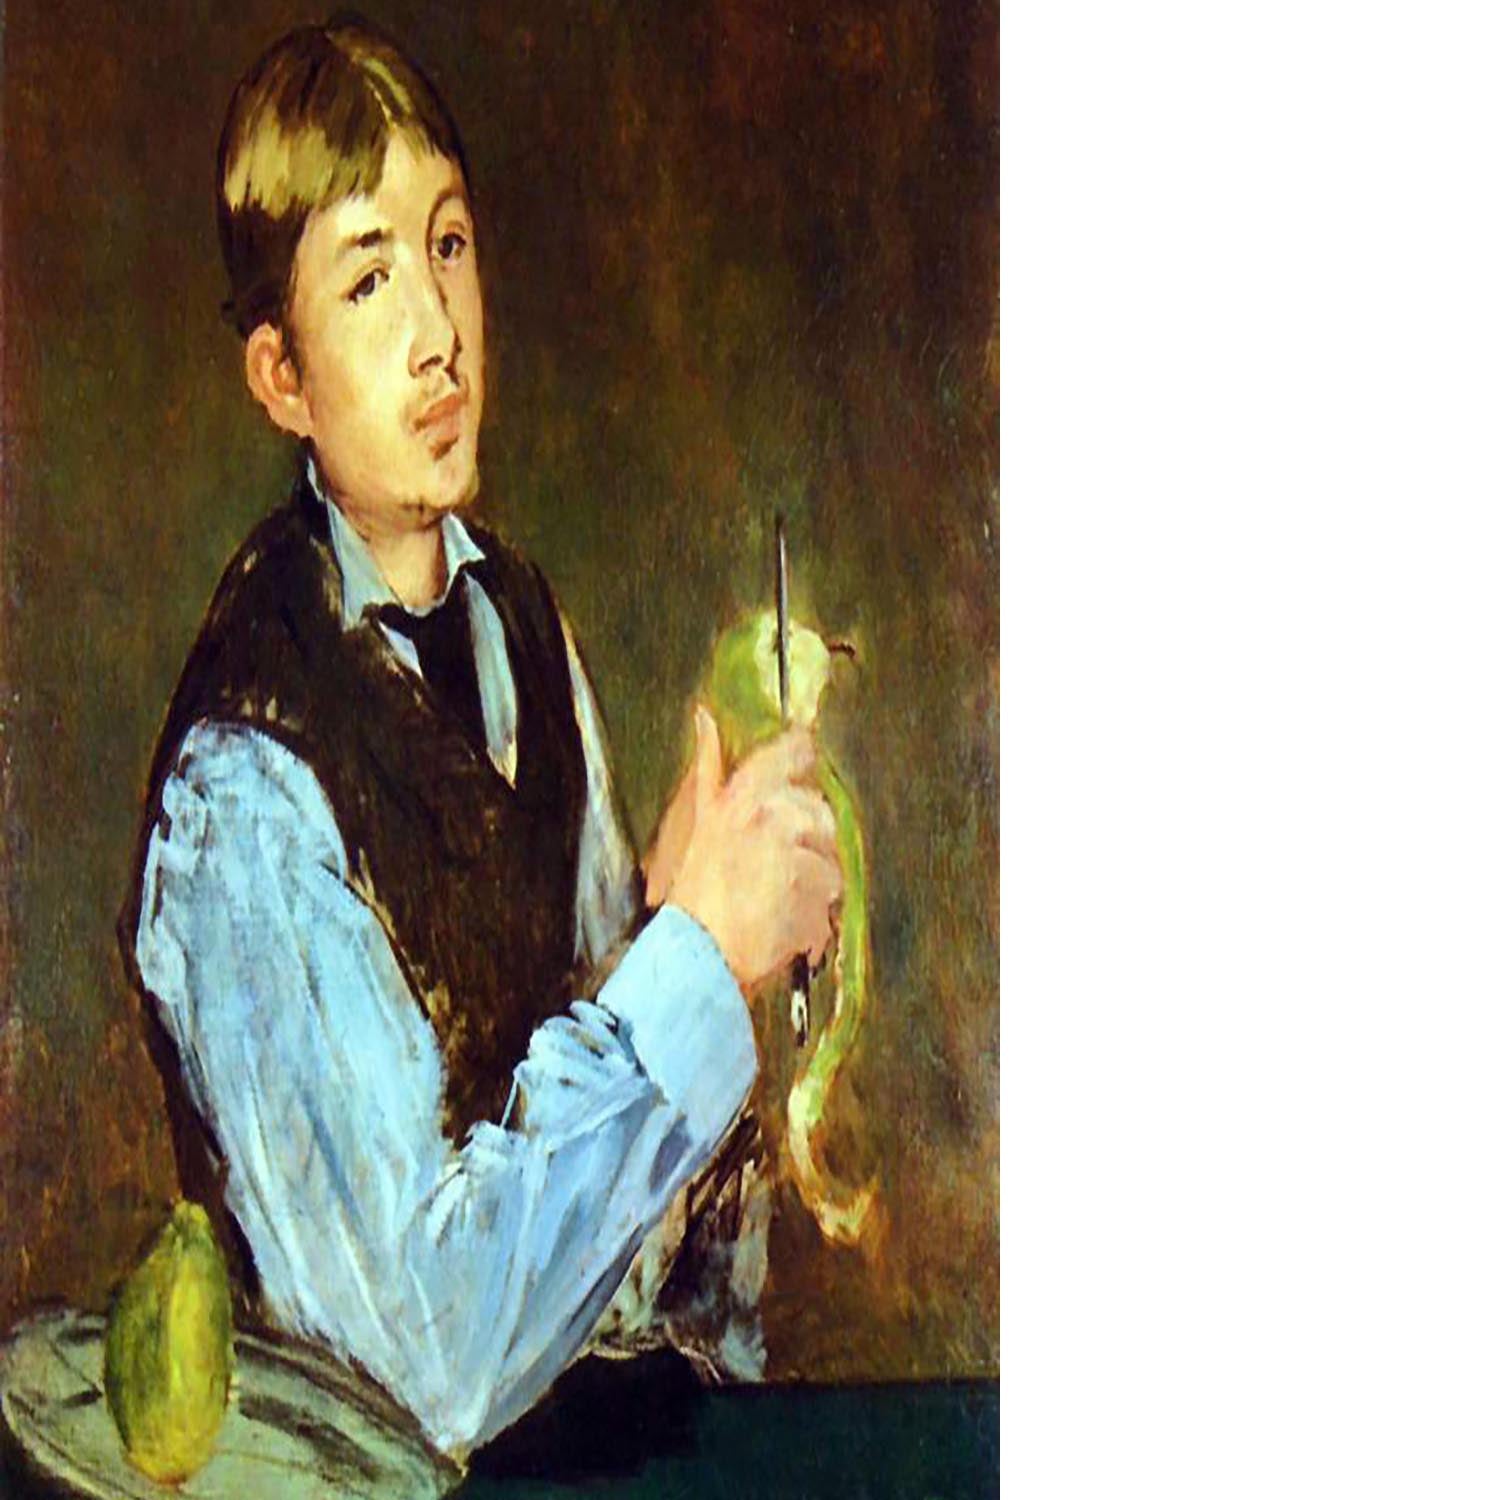 Portait of Leon Leenhoff by Manet Floating Framed Canvas